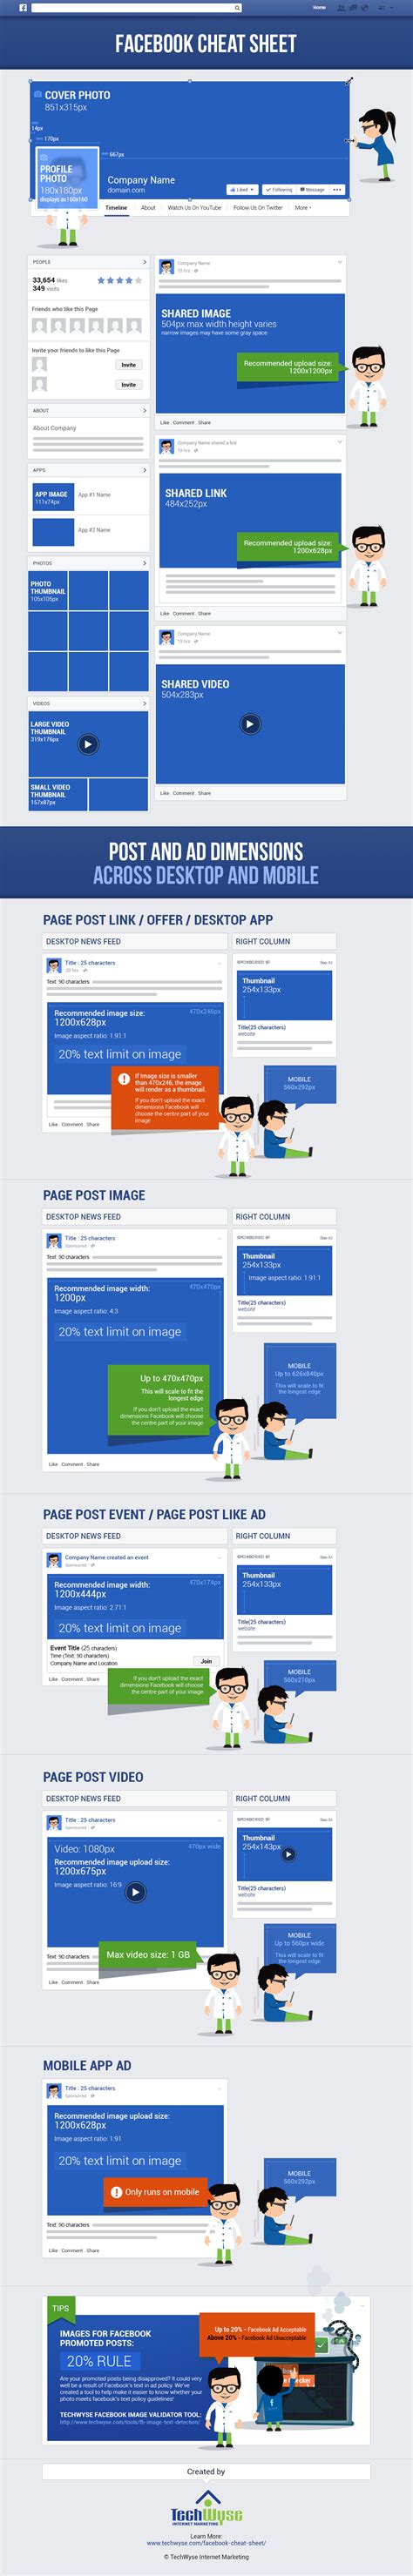 Facebook Cheat Sheet Image Size And Dimensions Updated